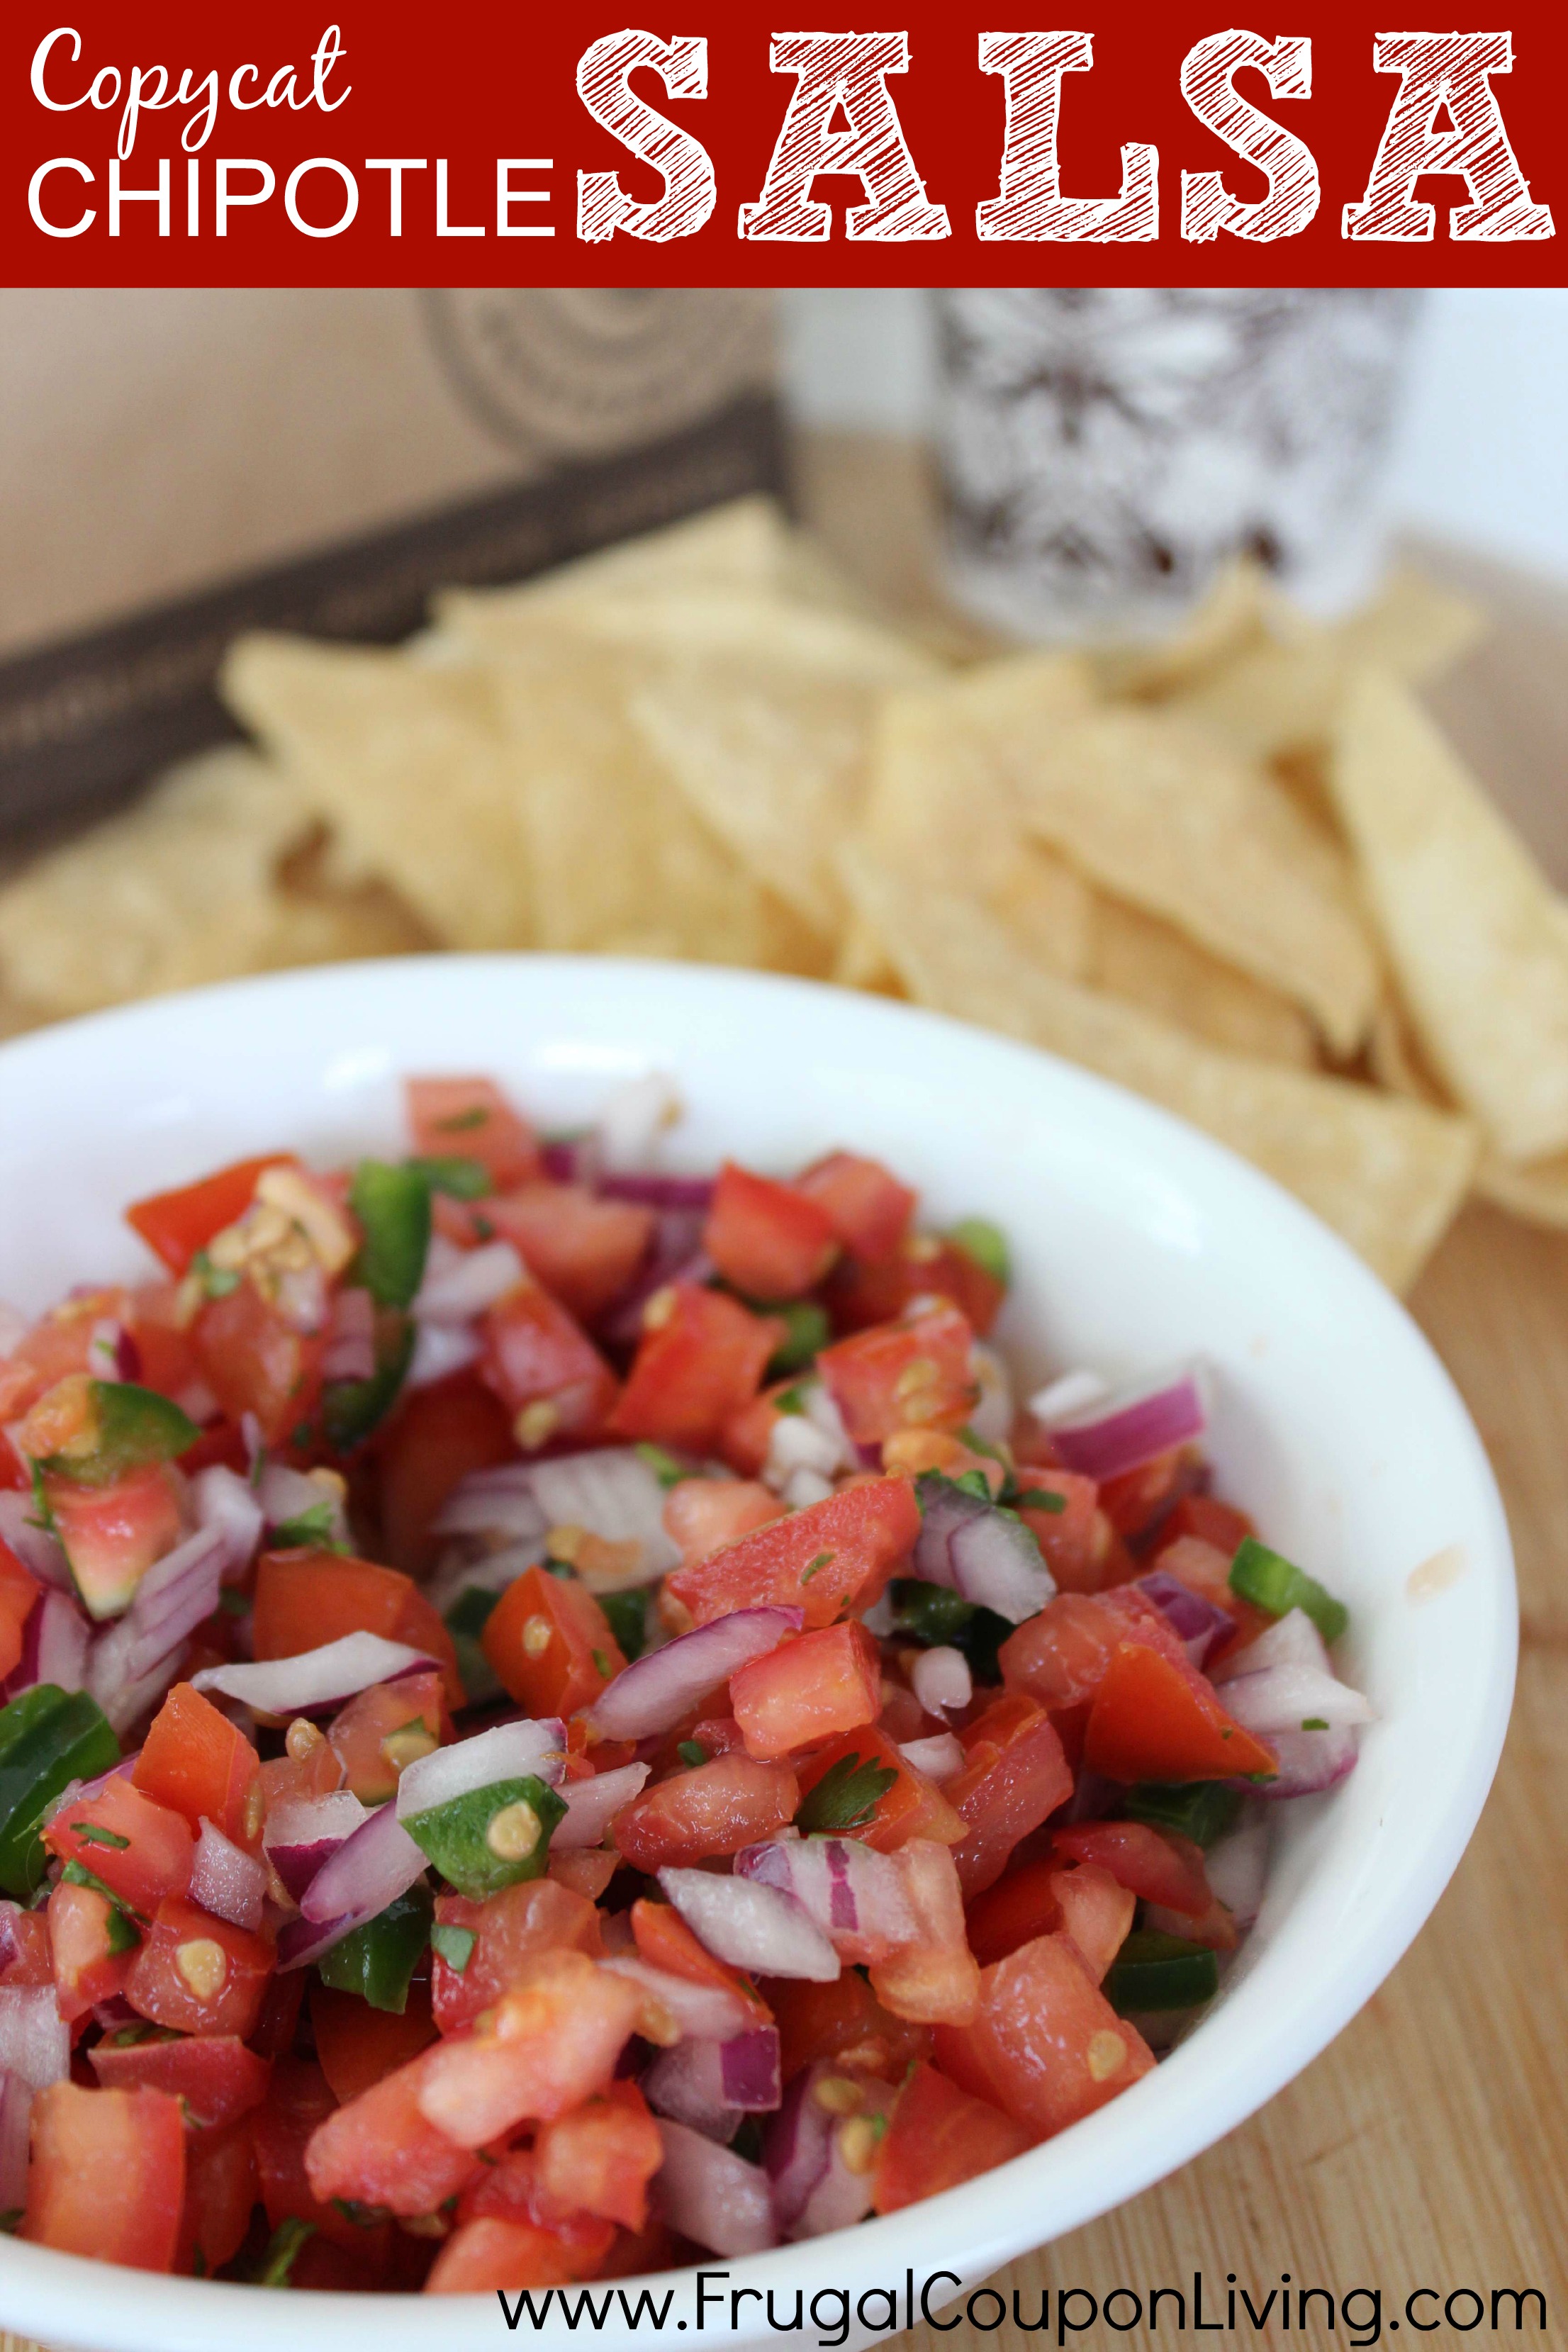 copycat-chipotle-salsa-recipe-frugal-coupon-living